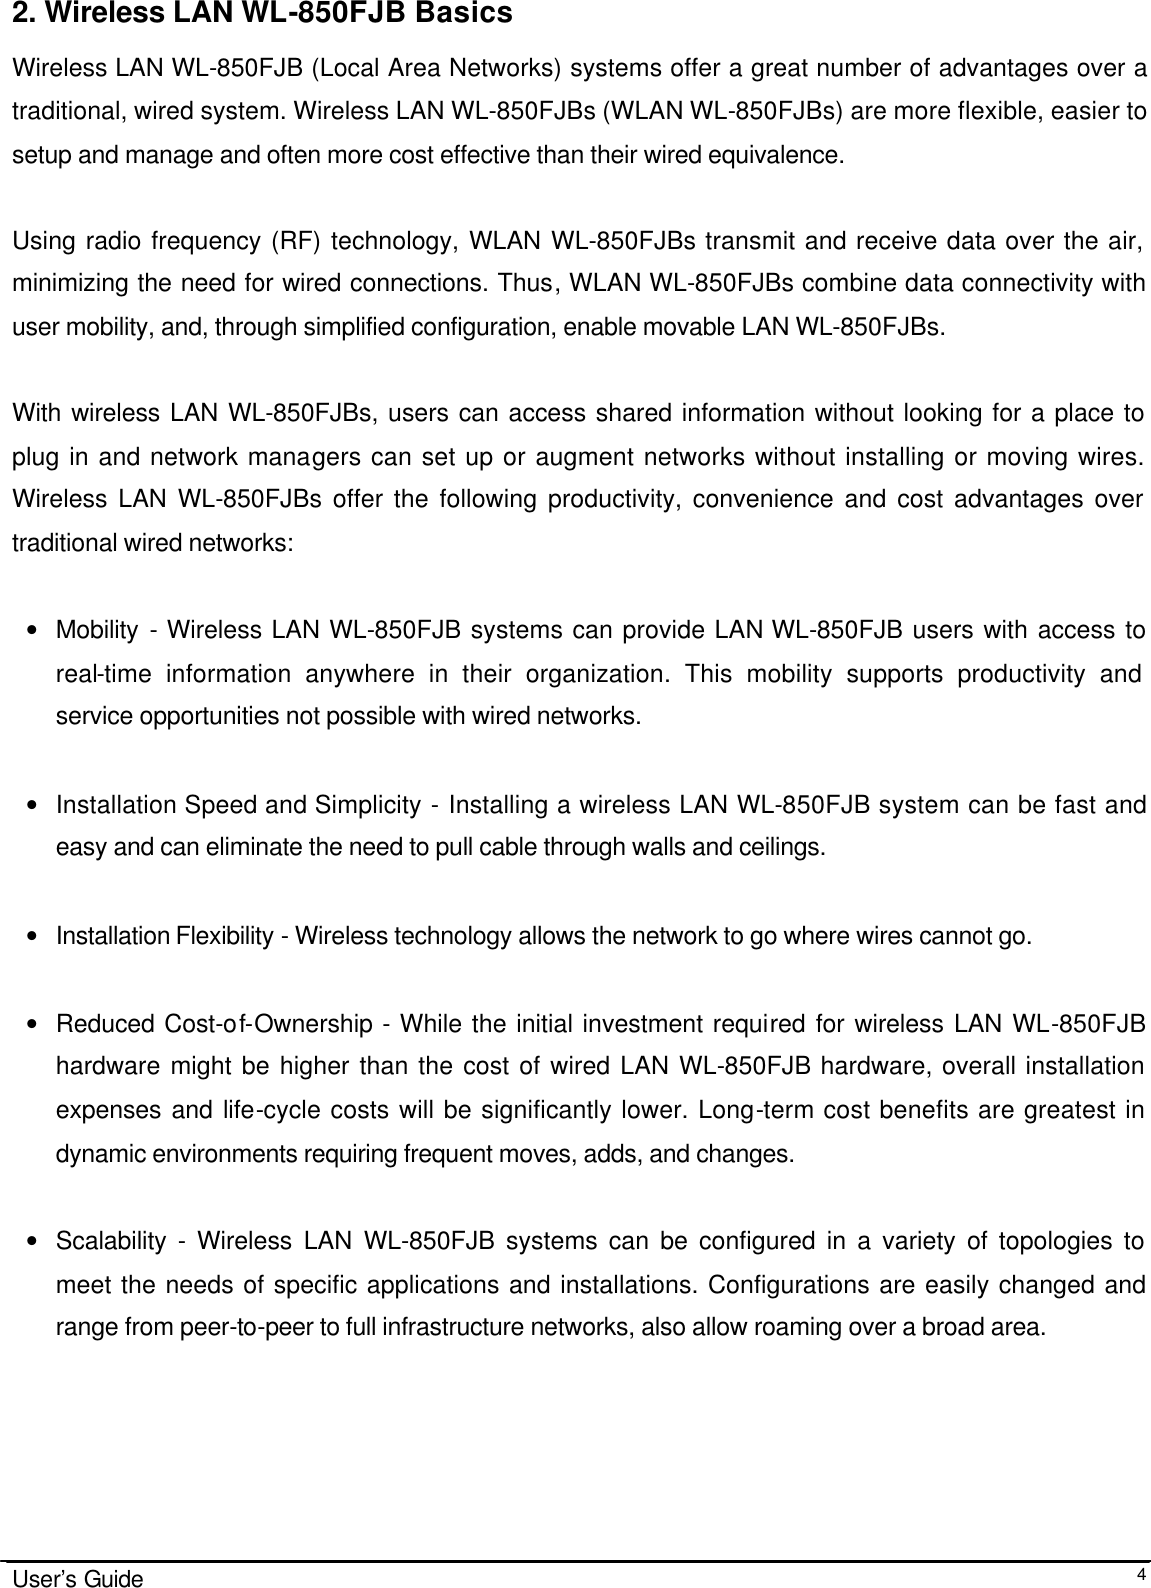                                                                                                                                                                              User’s Guide  42. Wireless LAN WL-850FJB Basics Wireless LAN WL-850FJB (Local Area Networks) systems offer a great number of advantages over a traditional, wired system. Wireless LAN WL-850FJBs (WLAN WL-850FJBs) are more flexible, easier to setup and manage and often more cost effective than their wired equivalence.  Using radio frequency (RF) technology, WLAN WL-850FJBs transmit and receive data over the air, minimizing the need for wired connections. Thus, WLAN WL-850FJBs combine data connectivity with user mobility, and, through simplified configuration, enable movable LAN WL-850FJBs.  With wireless LAN WL-850FJBs, users can access shared information without looking for a place to plug in and network managers can set up or augment networks without installing or moving wires. Wireless LAN WL-850FJBs offer the following productivity, convenience and cost advantages over traditional wired networks:     • Mobility  - Wireless LAN WL-850FJB systems can provide LAN WL-850FJB users with access to real-time information anywhere in their organization. This mobility supports productivity and service opportunities not possible with wired networks.  • Installation Speed and Simplicity - Installing a wireless LAN WL-850FJB system can be fast and easy and can eliminate the need to pull cable through walls and ceilings.   • Installation Flexibility - Wireless technology allows the network to go where wires cannot go.  • Reduced Cost-of-Ownership - While the initial investment required for wireless LAN WL-850FJB hardware might be higher than the cost of wired LAN WL-850FJB hardware, overall installation expenses and life-cycle costs will be significantly lower. Long-term cost benefits are greatest in dynamic environments requiring frequent moves, adds, and changes.   • Scalability  - Wireless LAN WL-850FJB systems can be configured in a variety of topologies to meet the needs of specific applications and installations. Configurations are easily changed and range from peer-to-peer to full infrastructure networks, also allow roaming over a broad area.                